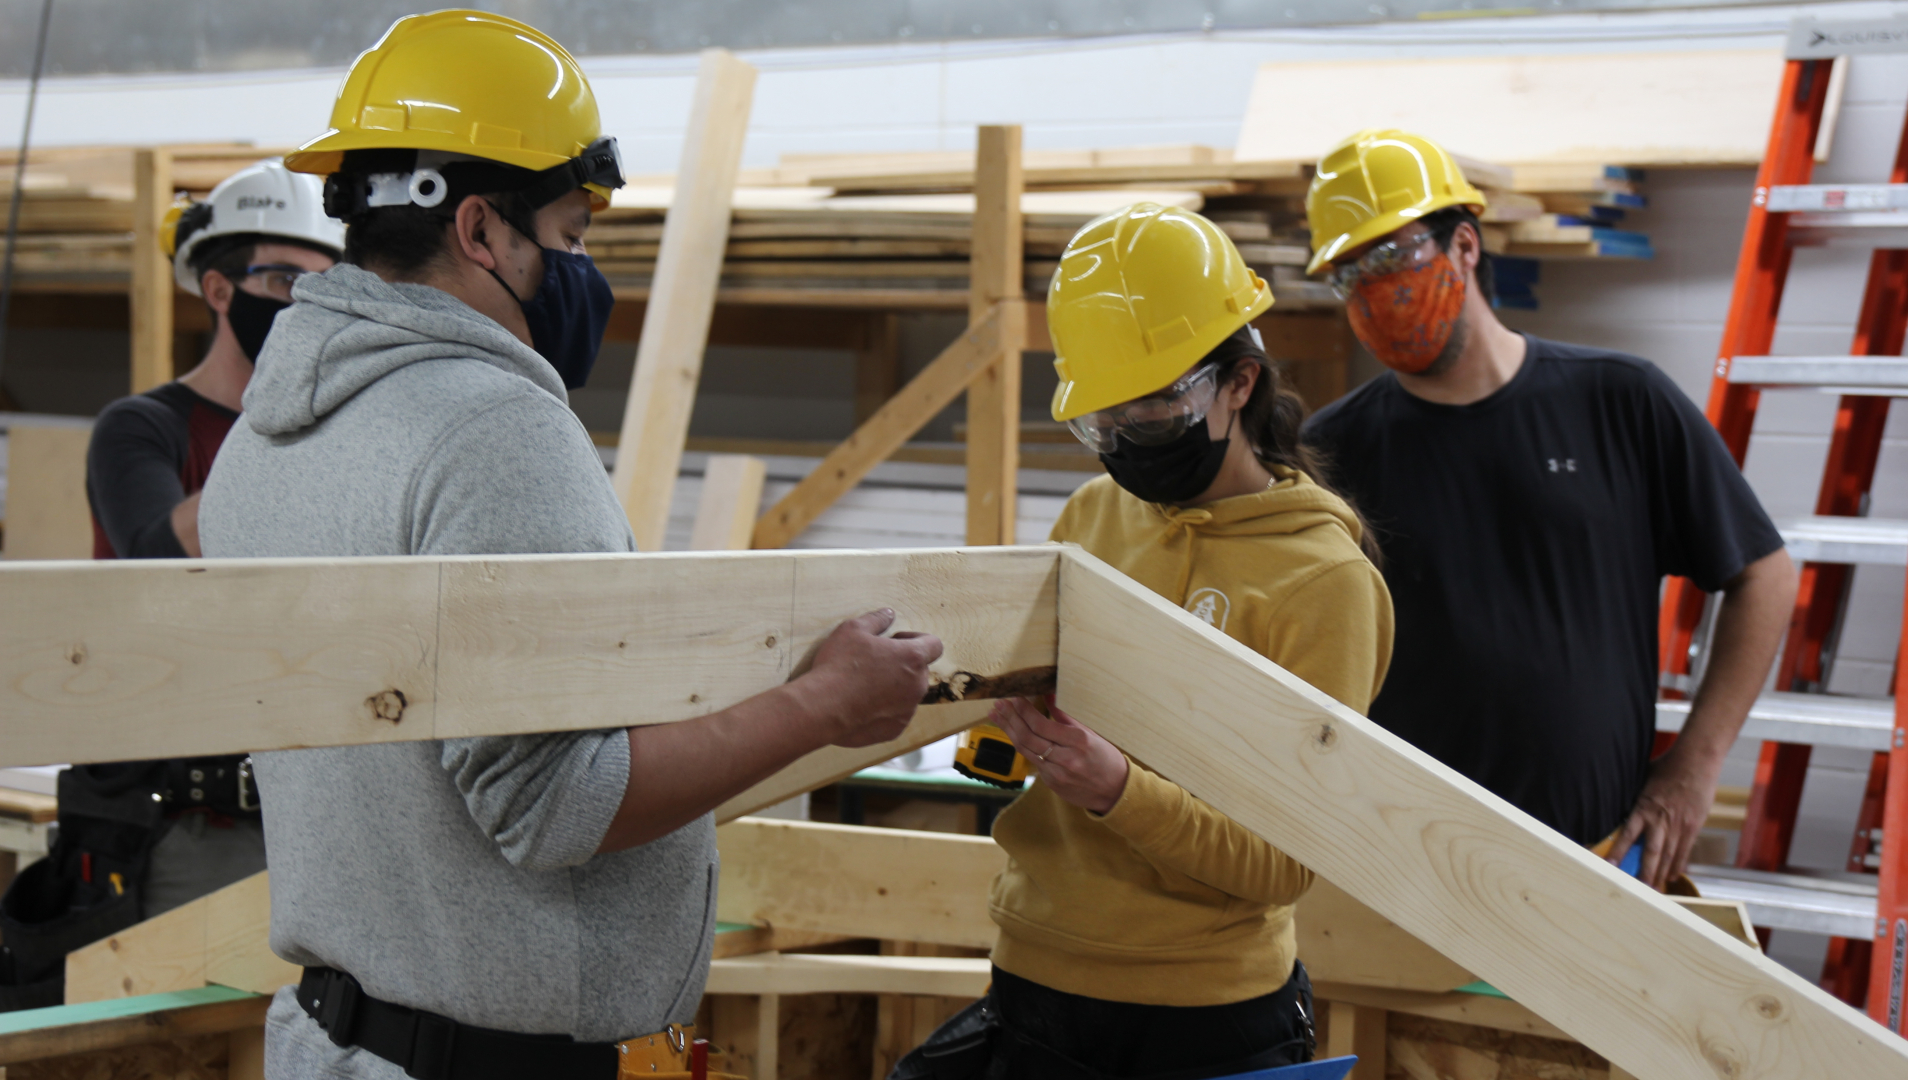 A group of four students, all in hard hats, work to assemble a piece of a building assignment